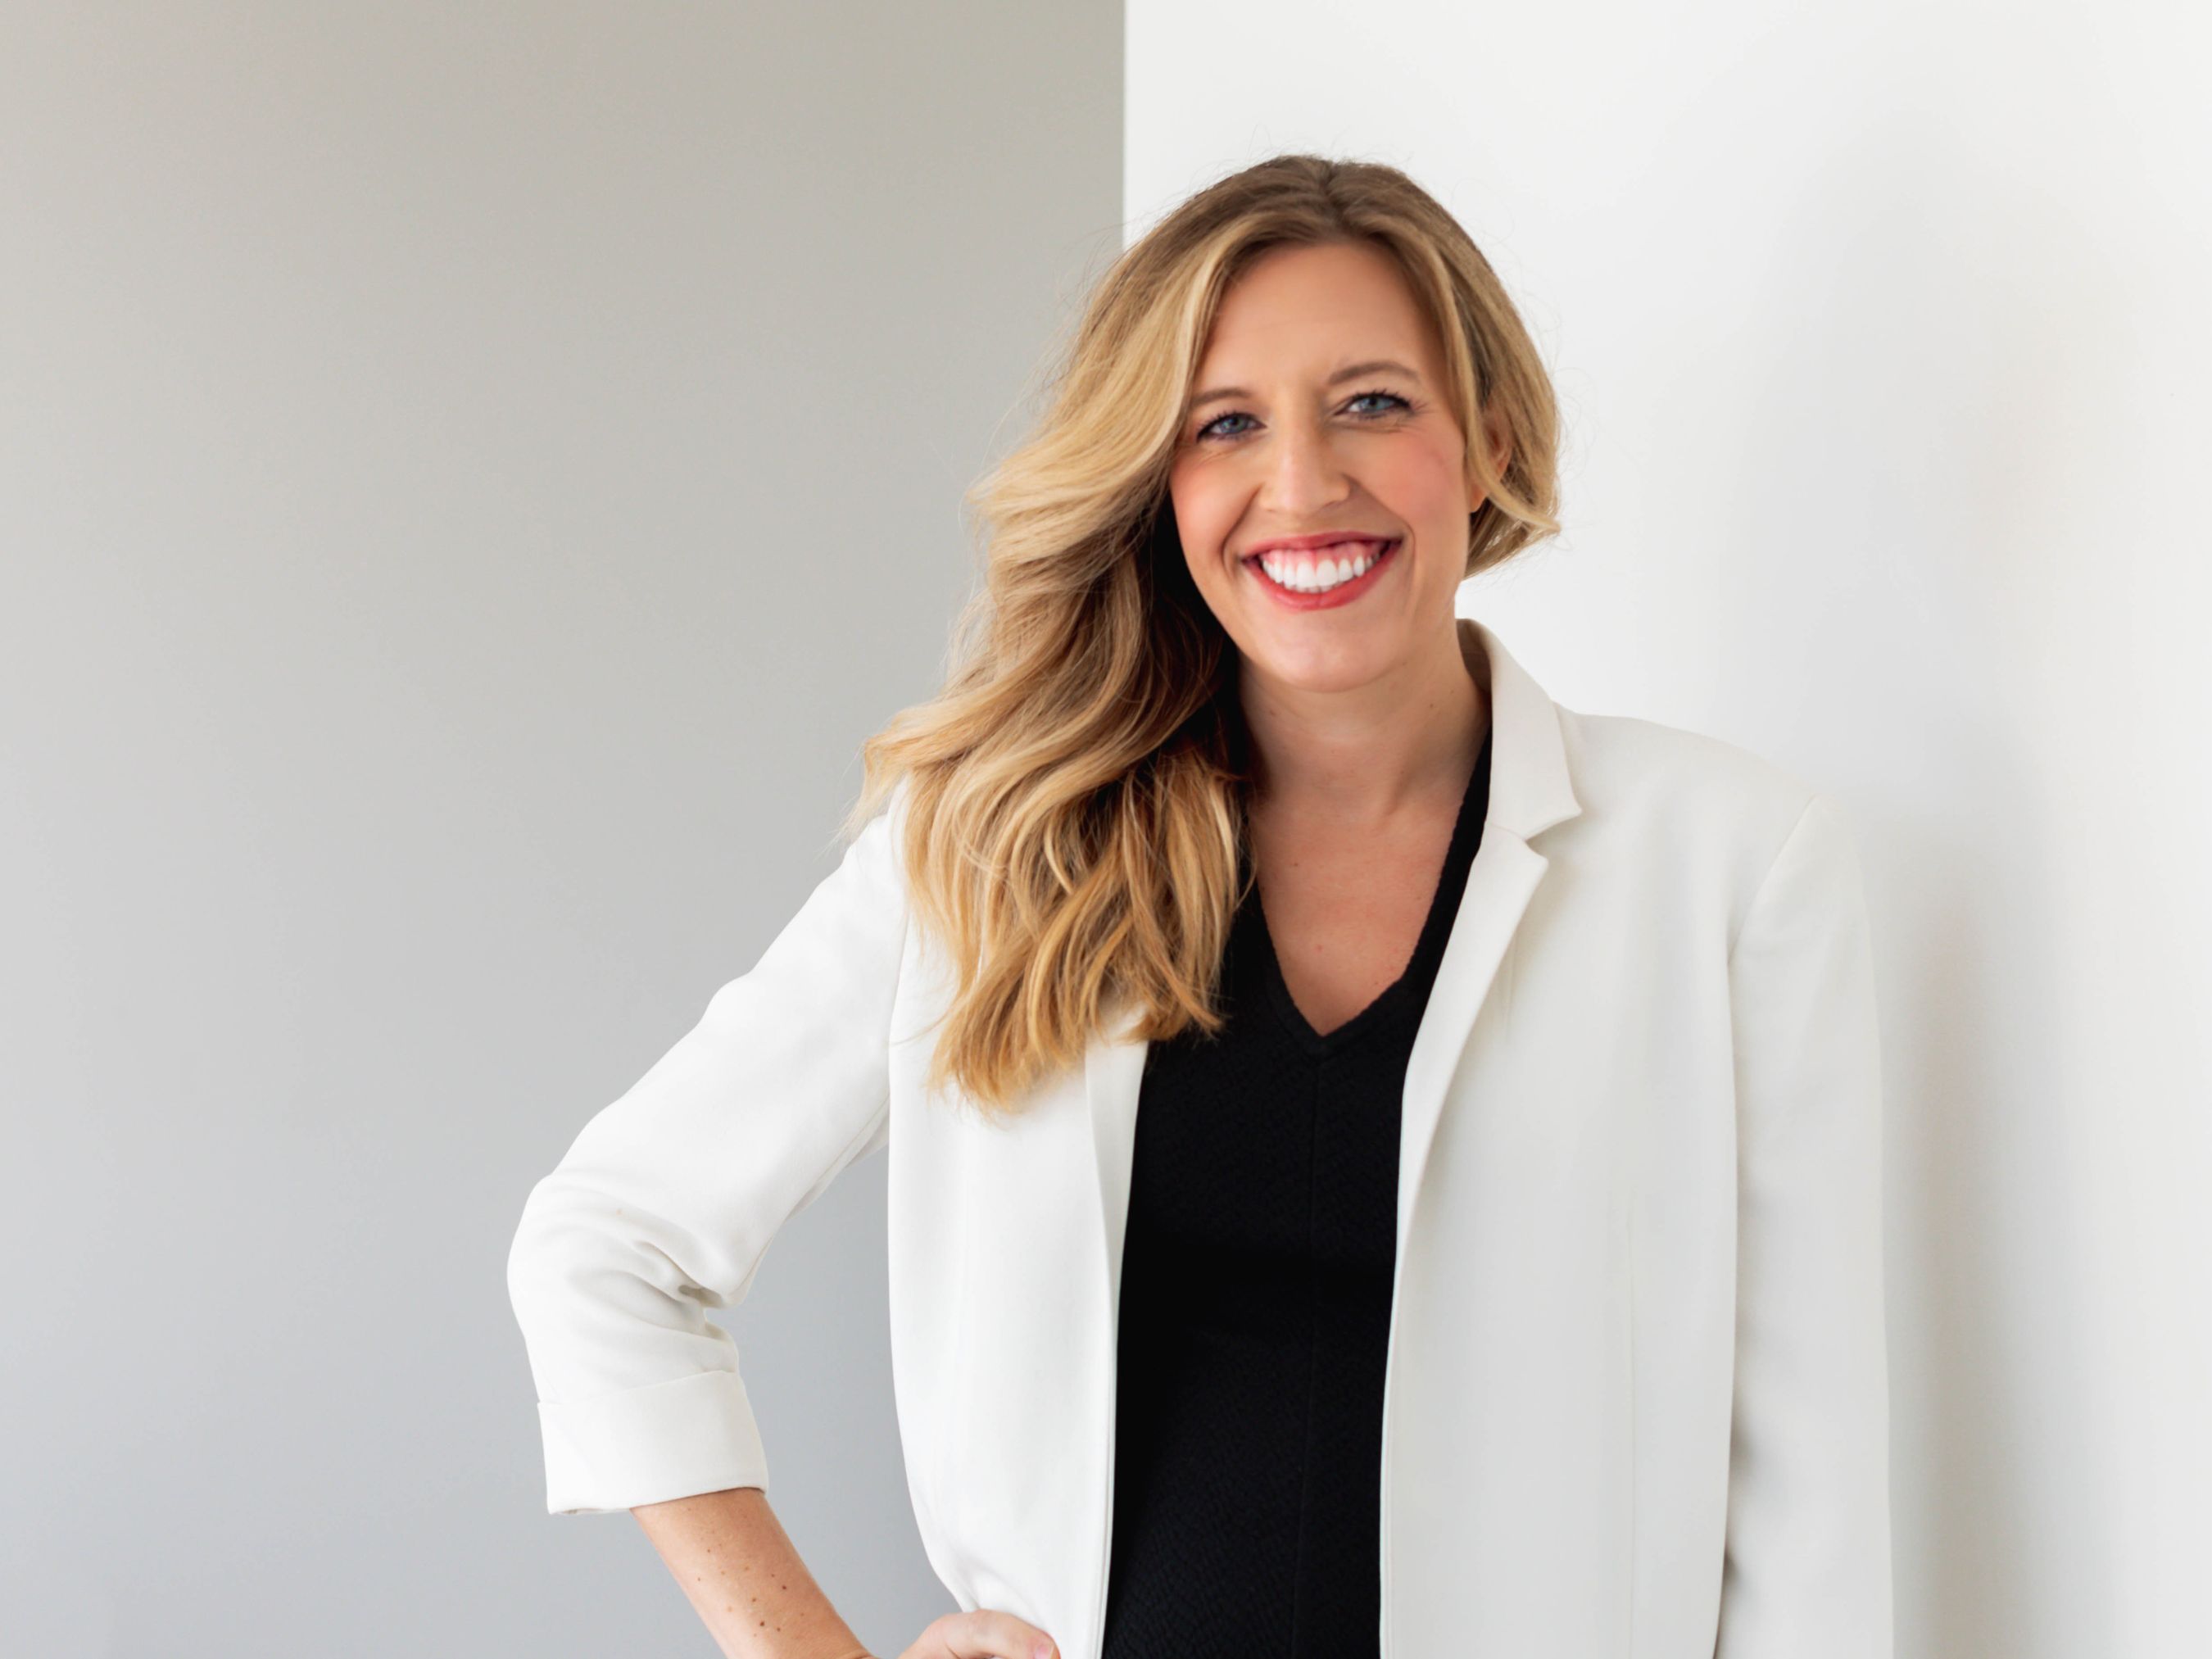 Mekell Barker Promoted to VP of Account Service, Hotels at Tambourine.